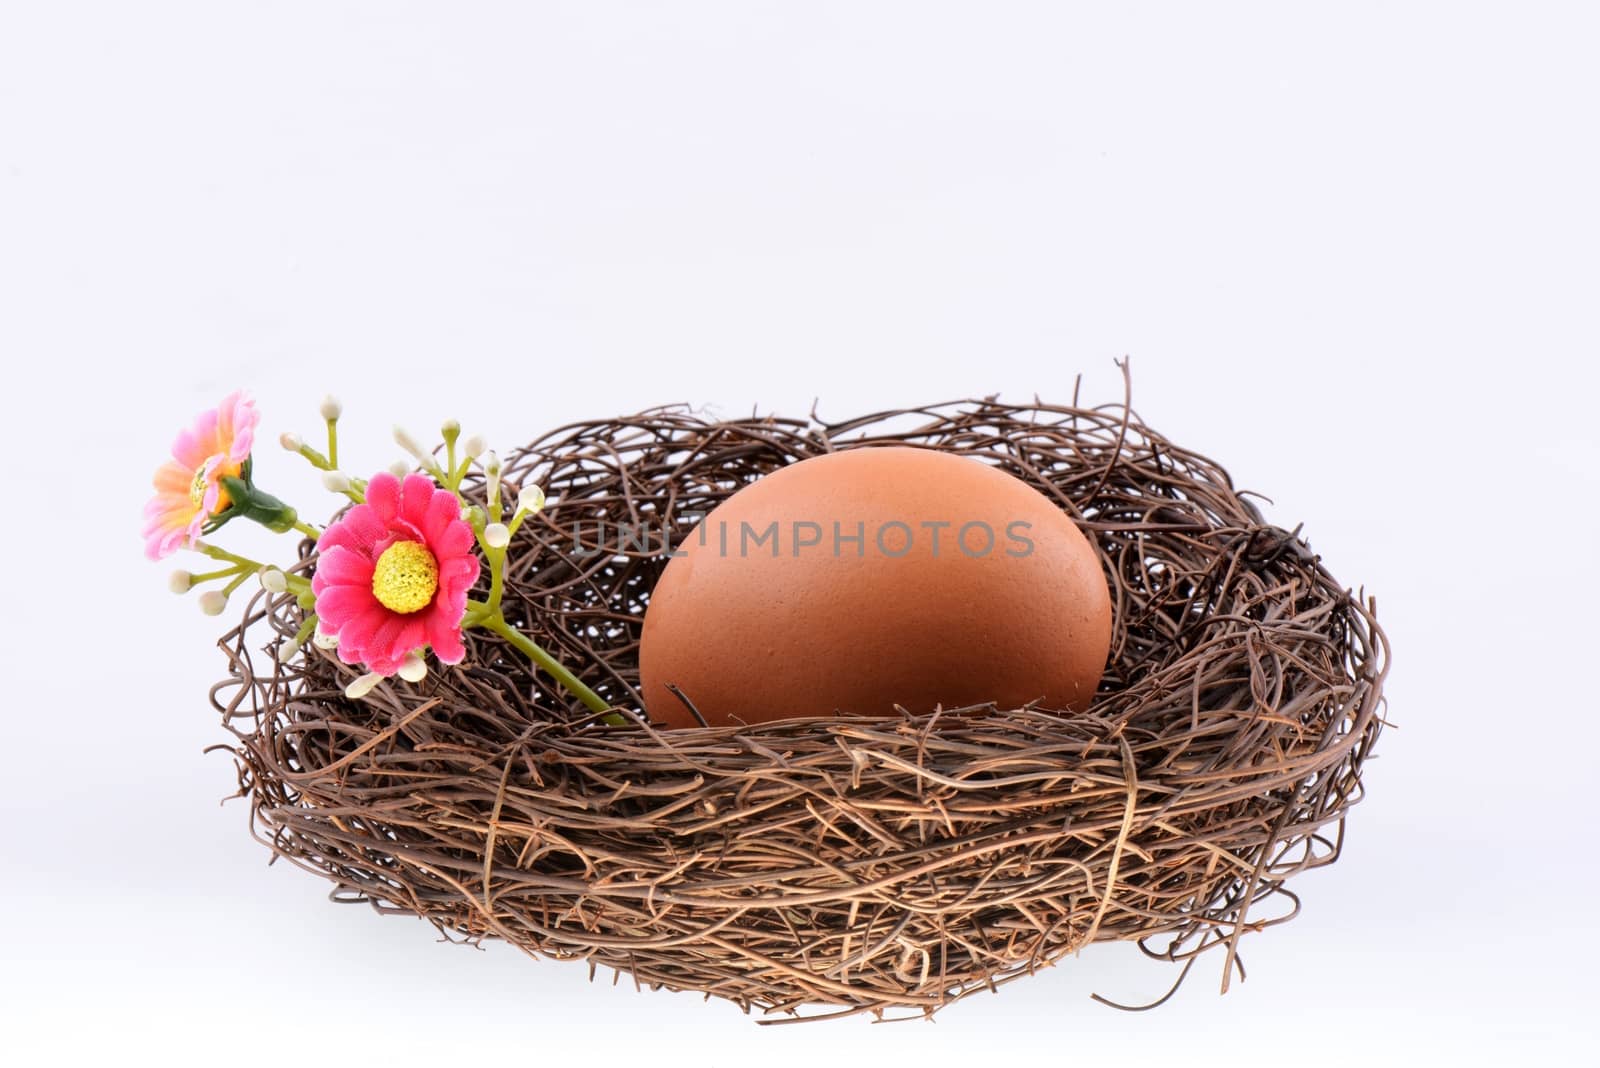 Bird's nest with an egg isolated on a white background